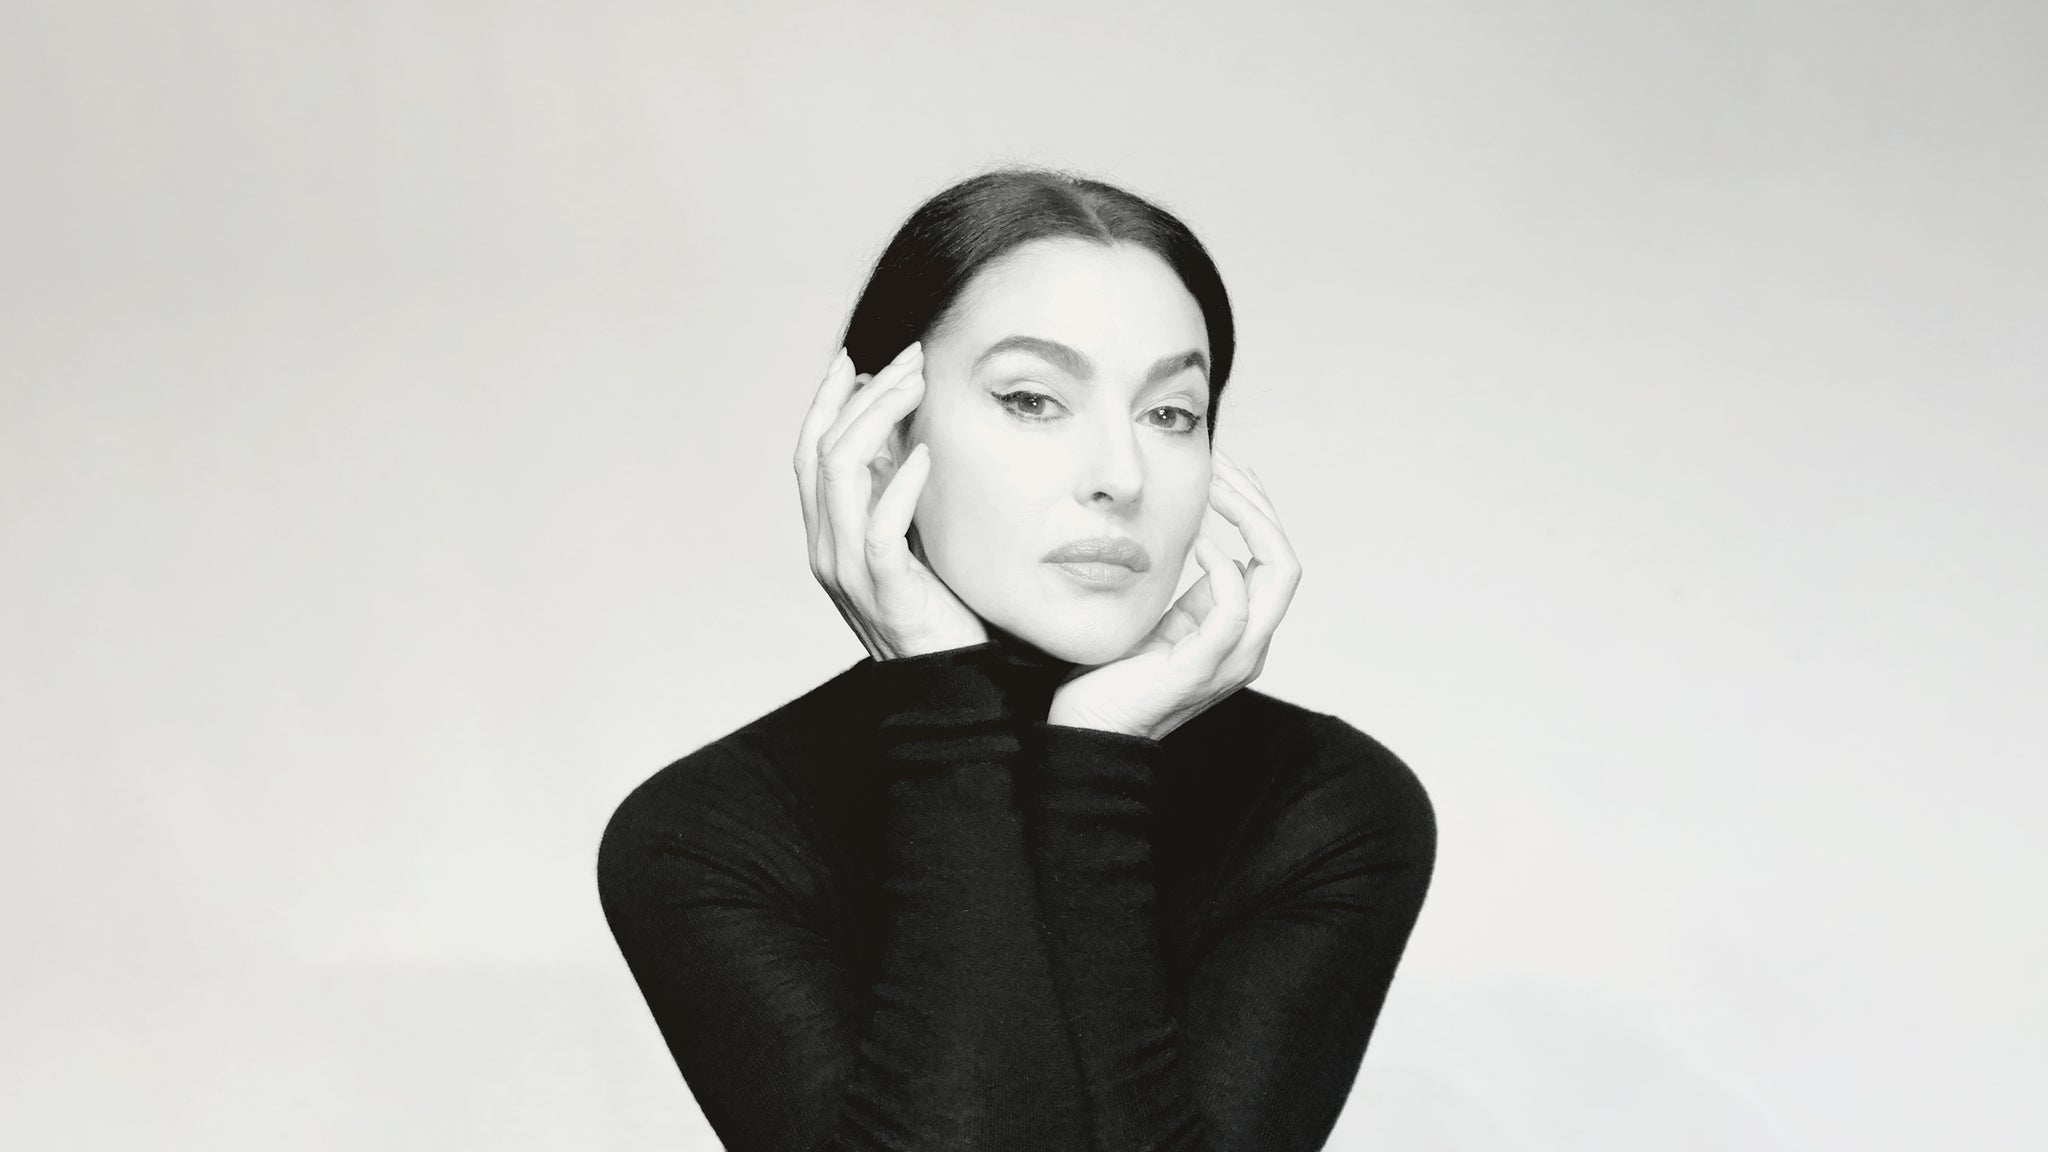 Monica Bellucci in New York promo photo for Official Platinum presale offer code